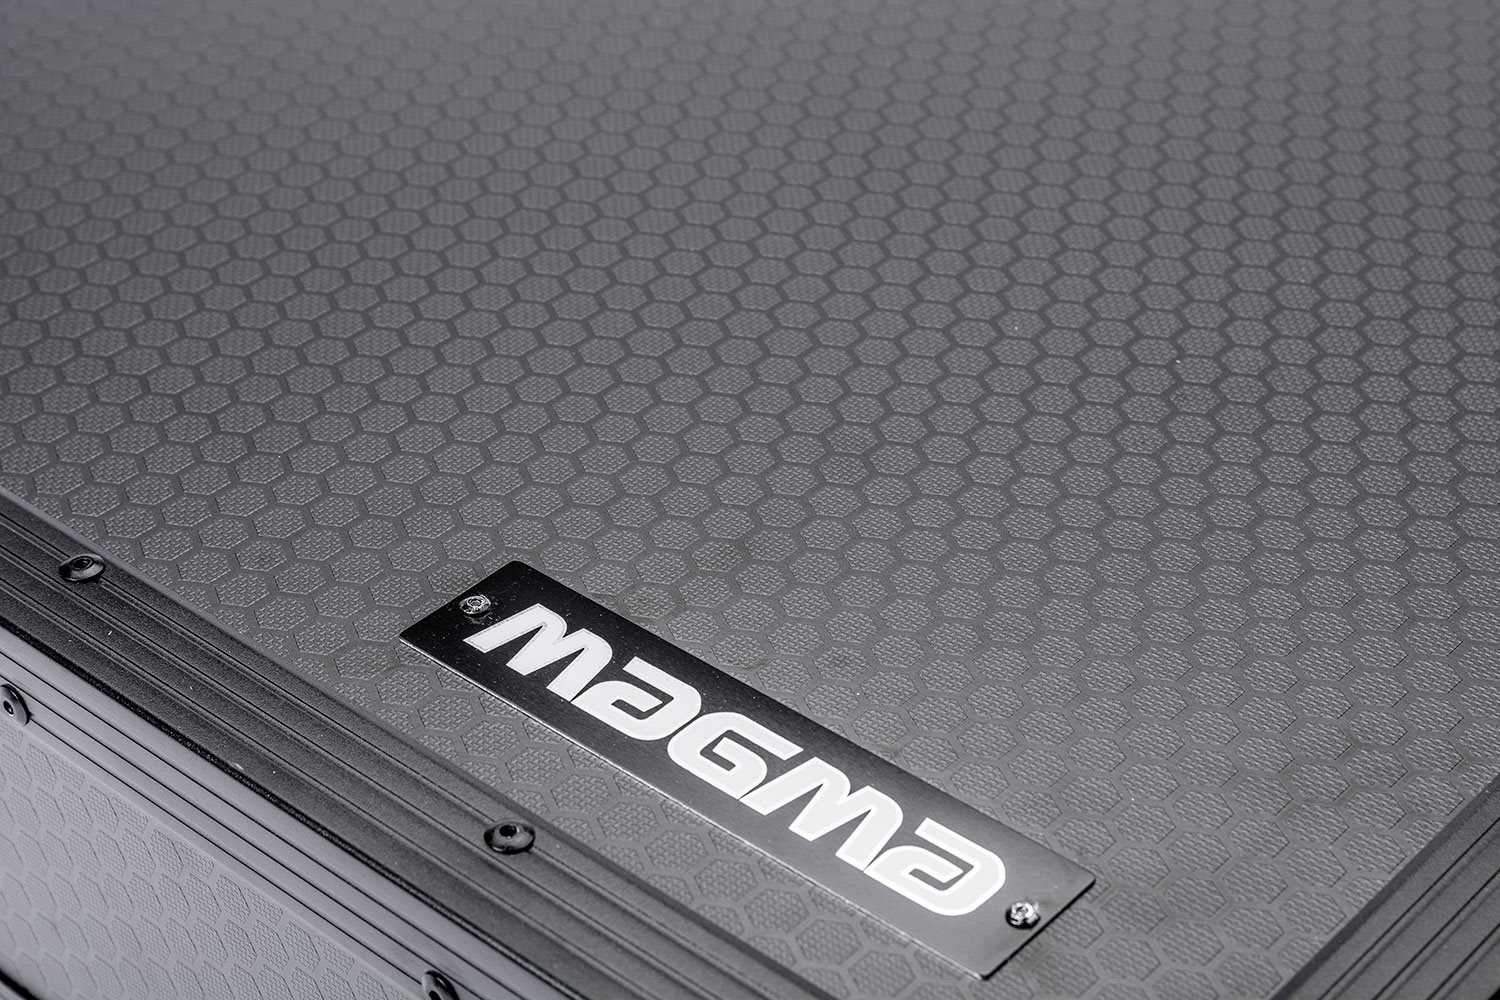 Magma MGA40982 Multi-Format Workstation XXL Plus - PSSL ProSound and Stage Lighting